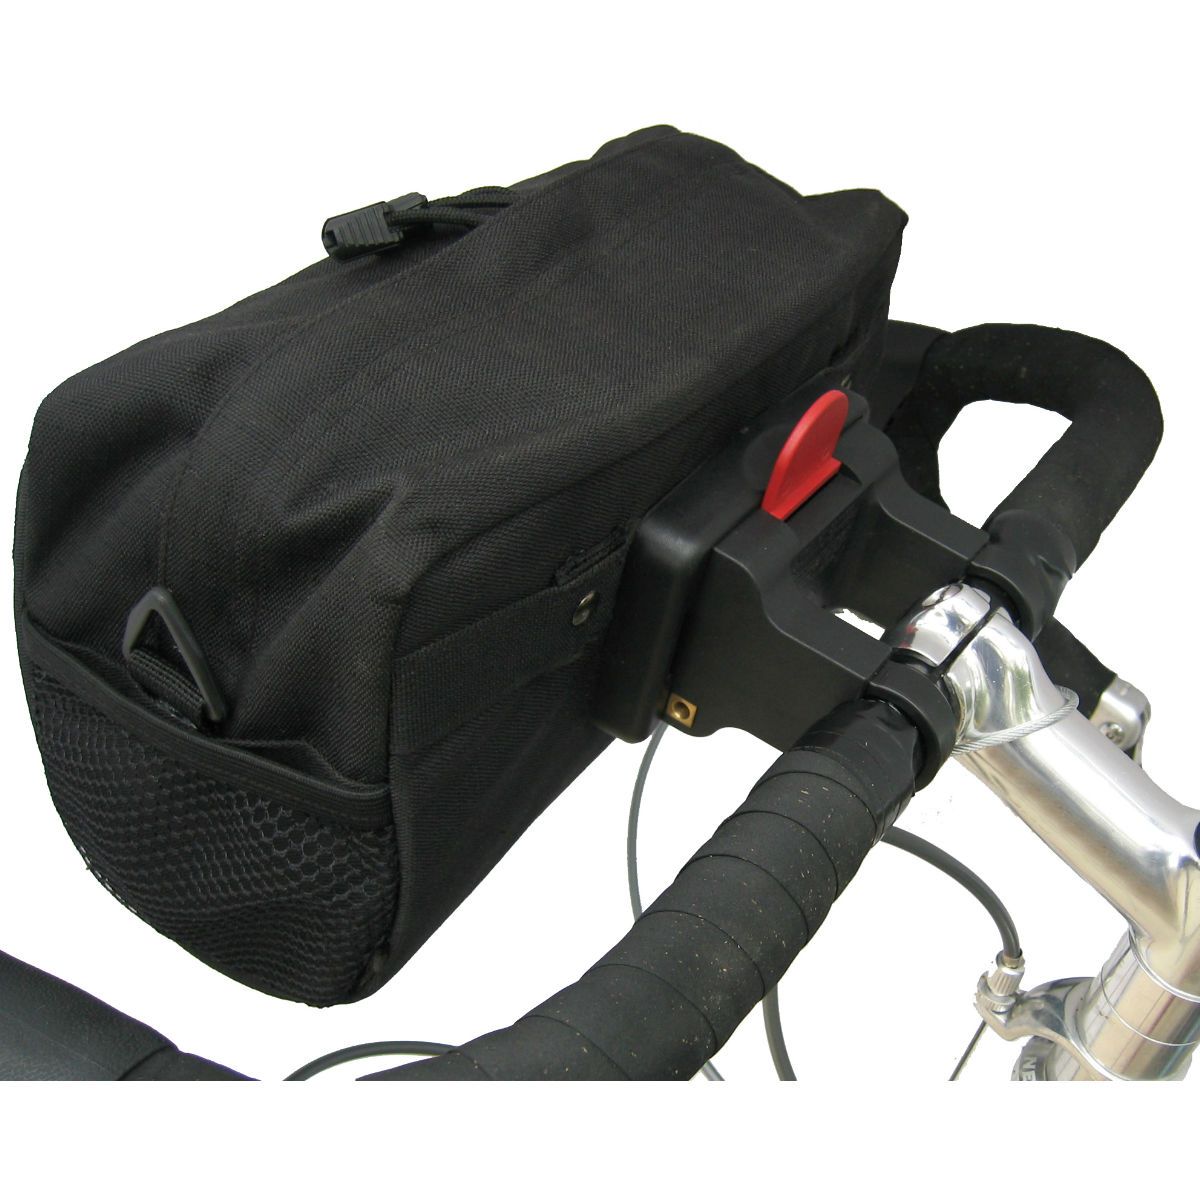 Amazon.com : Bushwhacker Durango - Bicycle Handlebar Bag Cycling Front Pack  Bike Tool Pouch Holder Carrier Storage Frame Accessories Handle Bar Saddle  : Sports & Outdoors